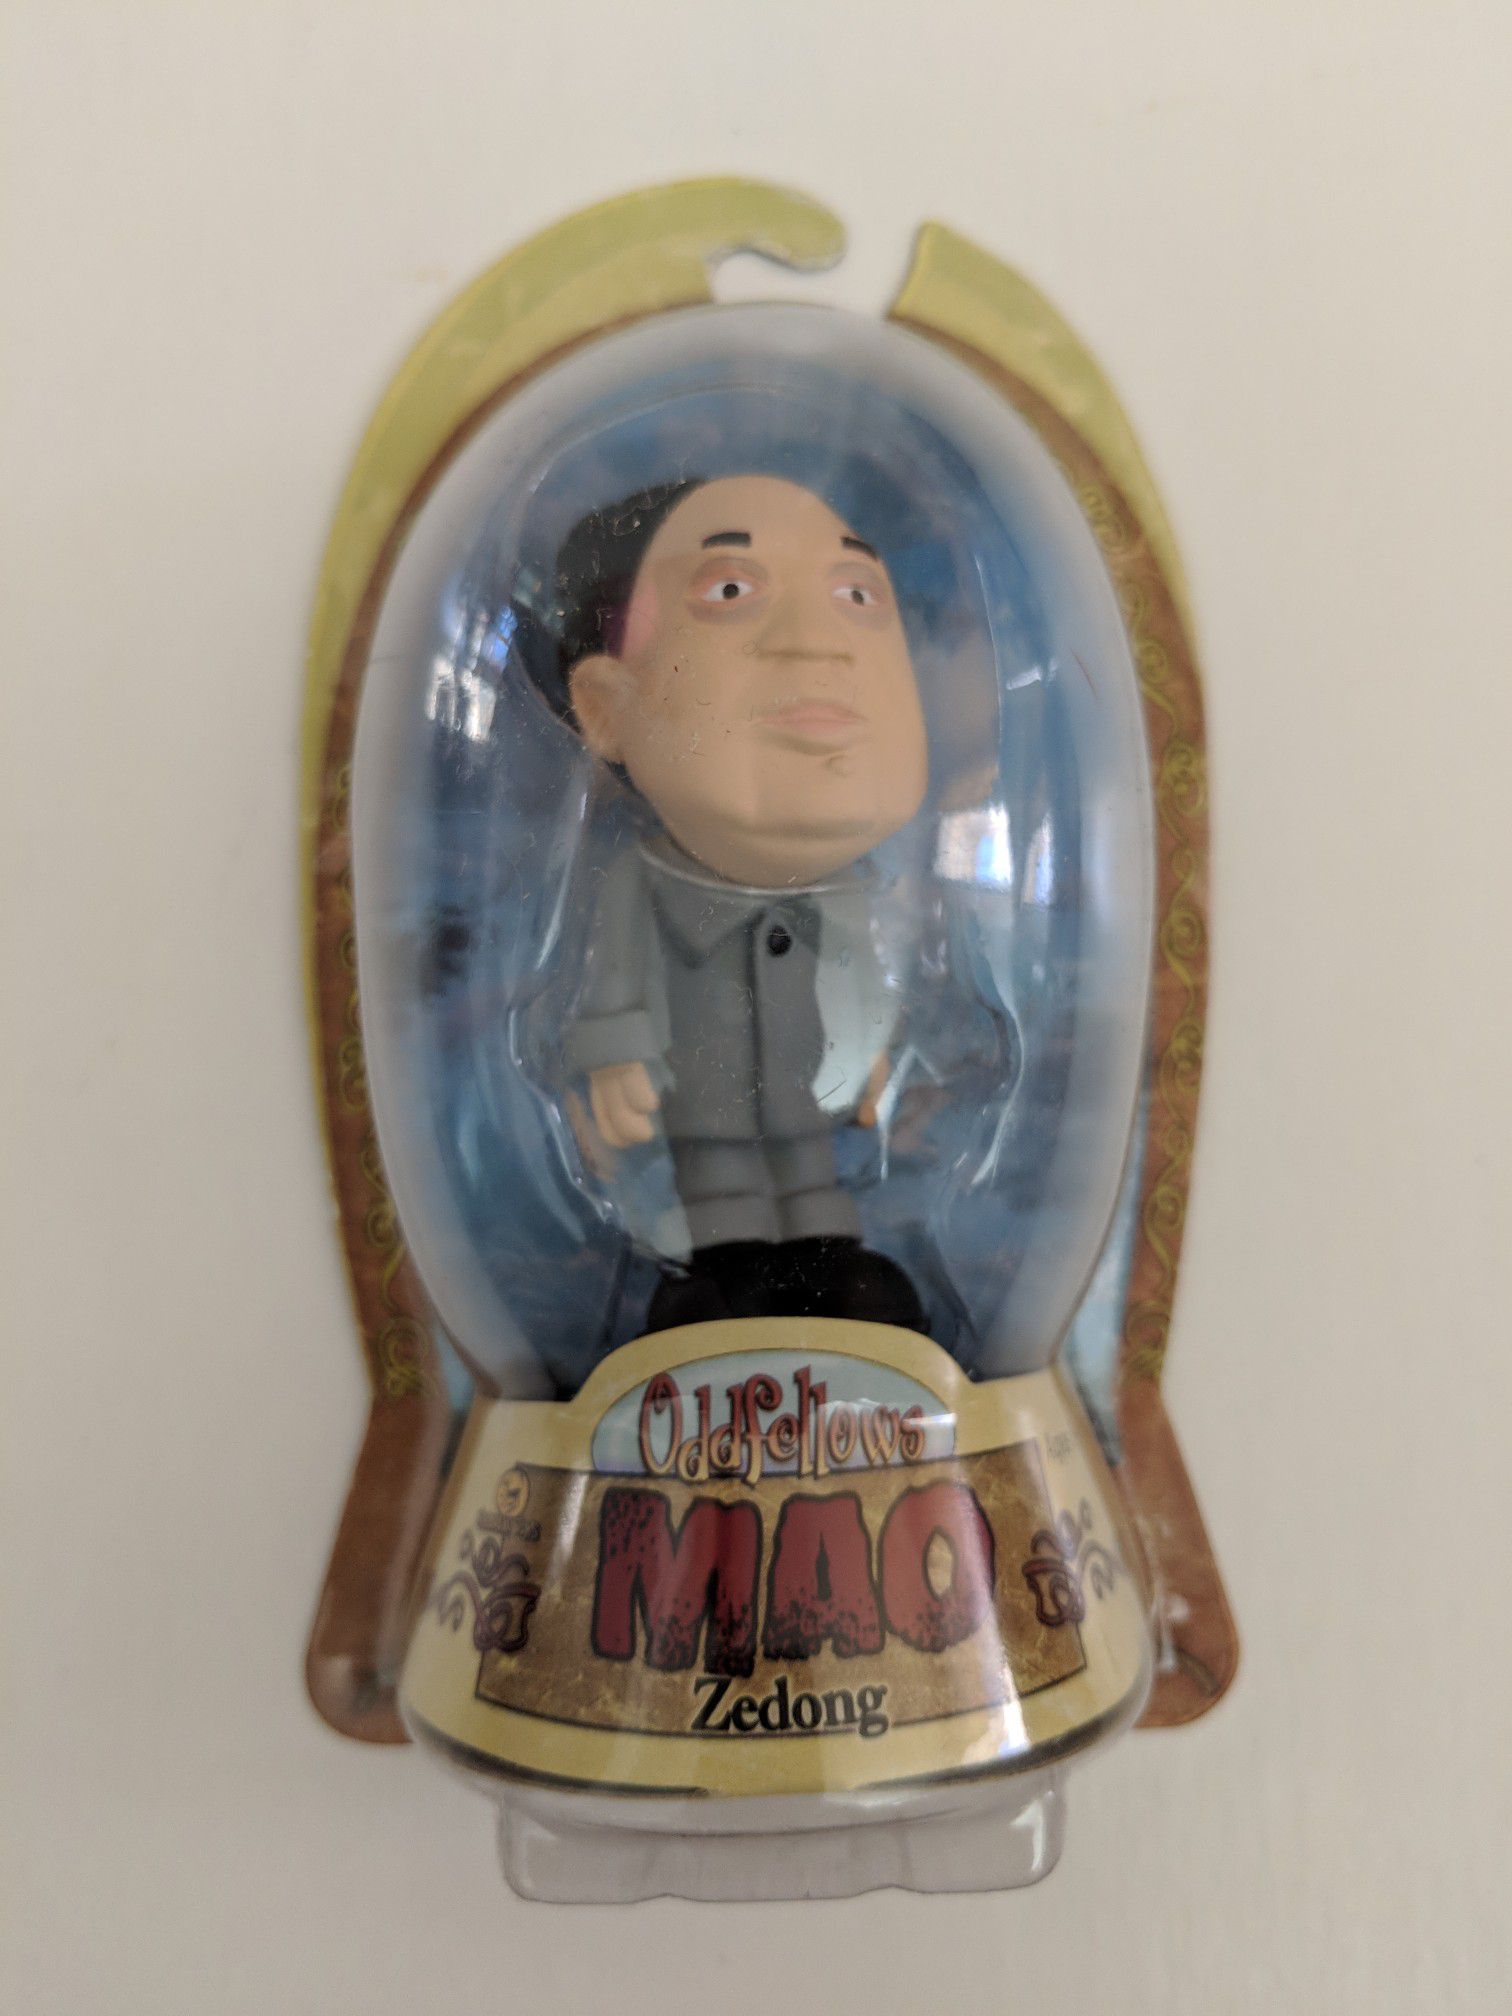 Lord Crumwell's Oddfellows NIB Mao Zedong Collectible Historical Figure Toy